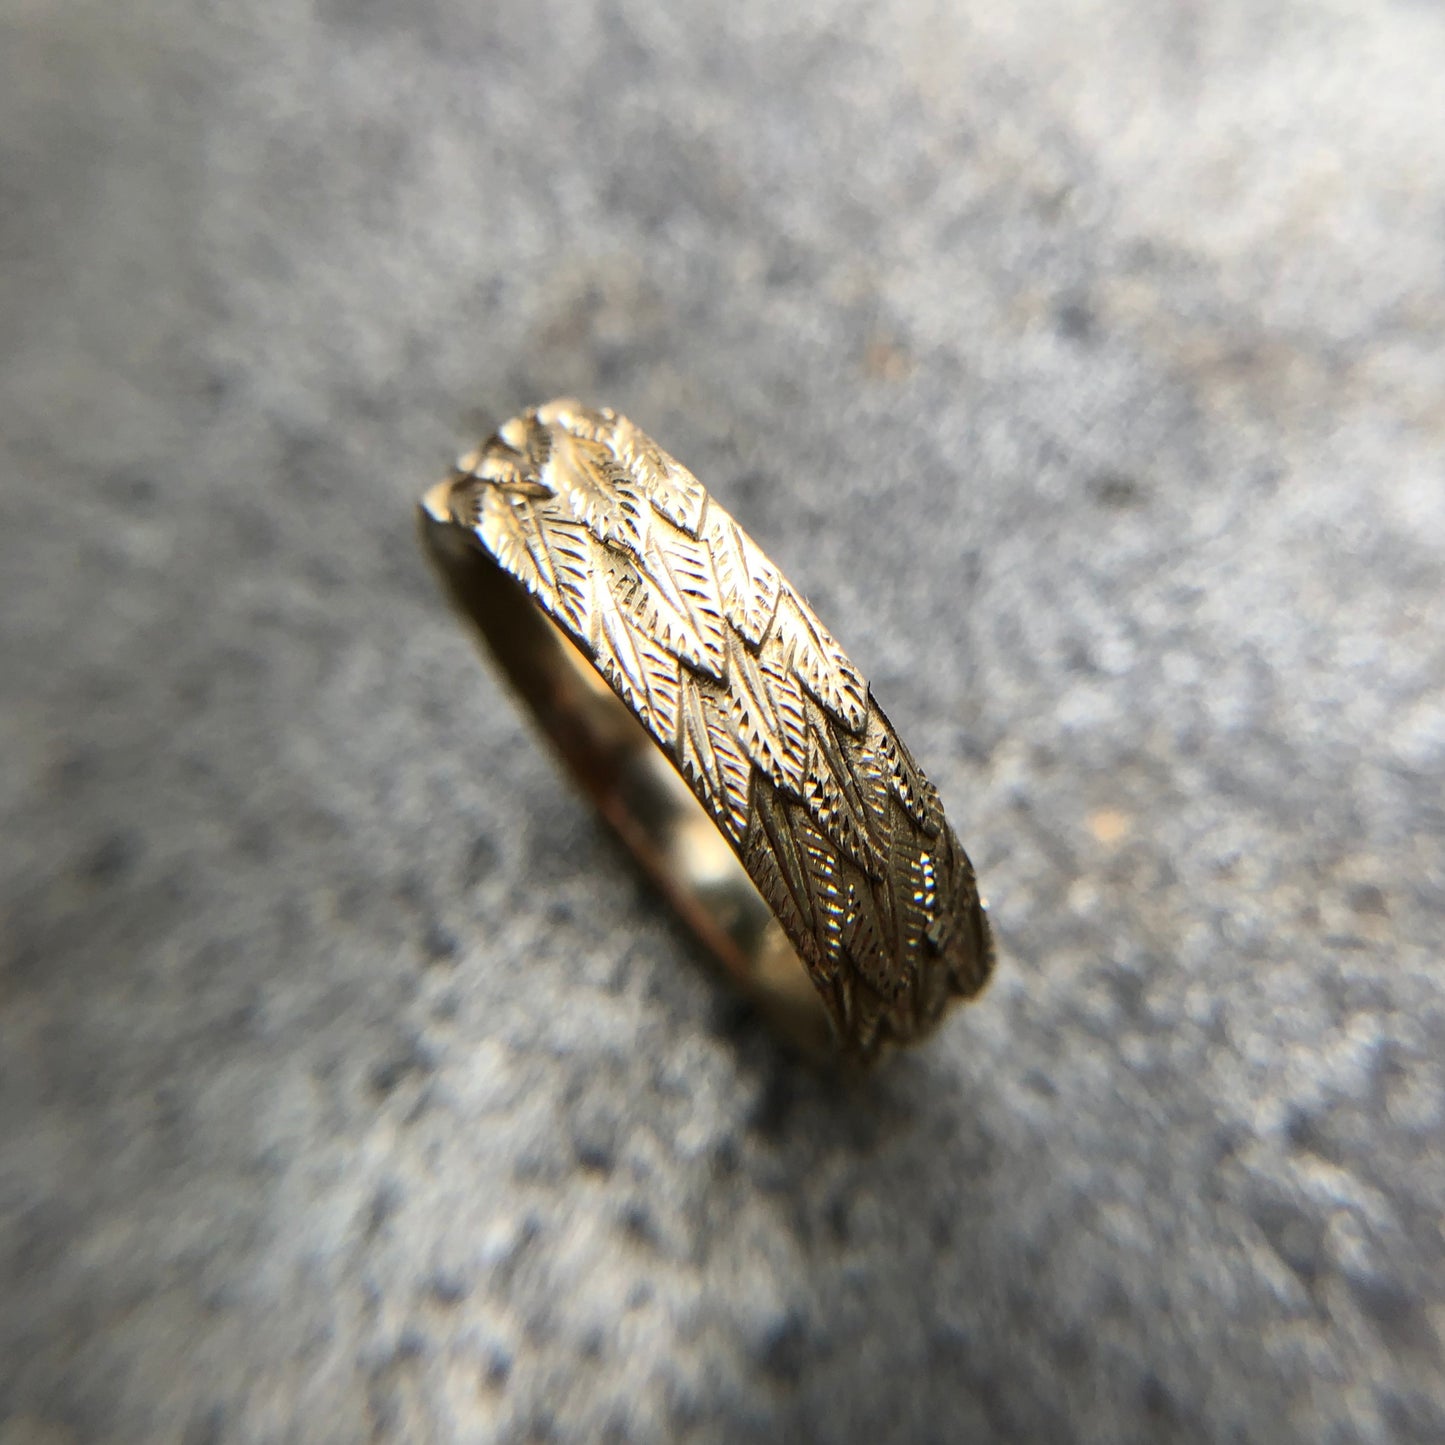 Castro Smith Jewelry Gold Feather Wedding Band Ring.